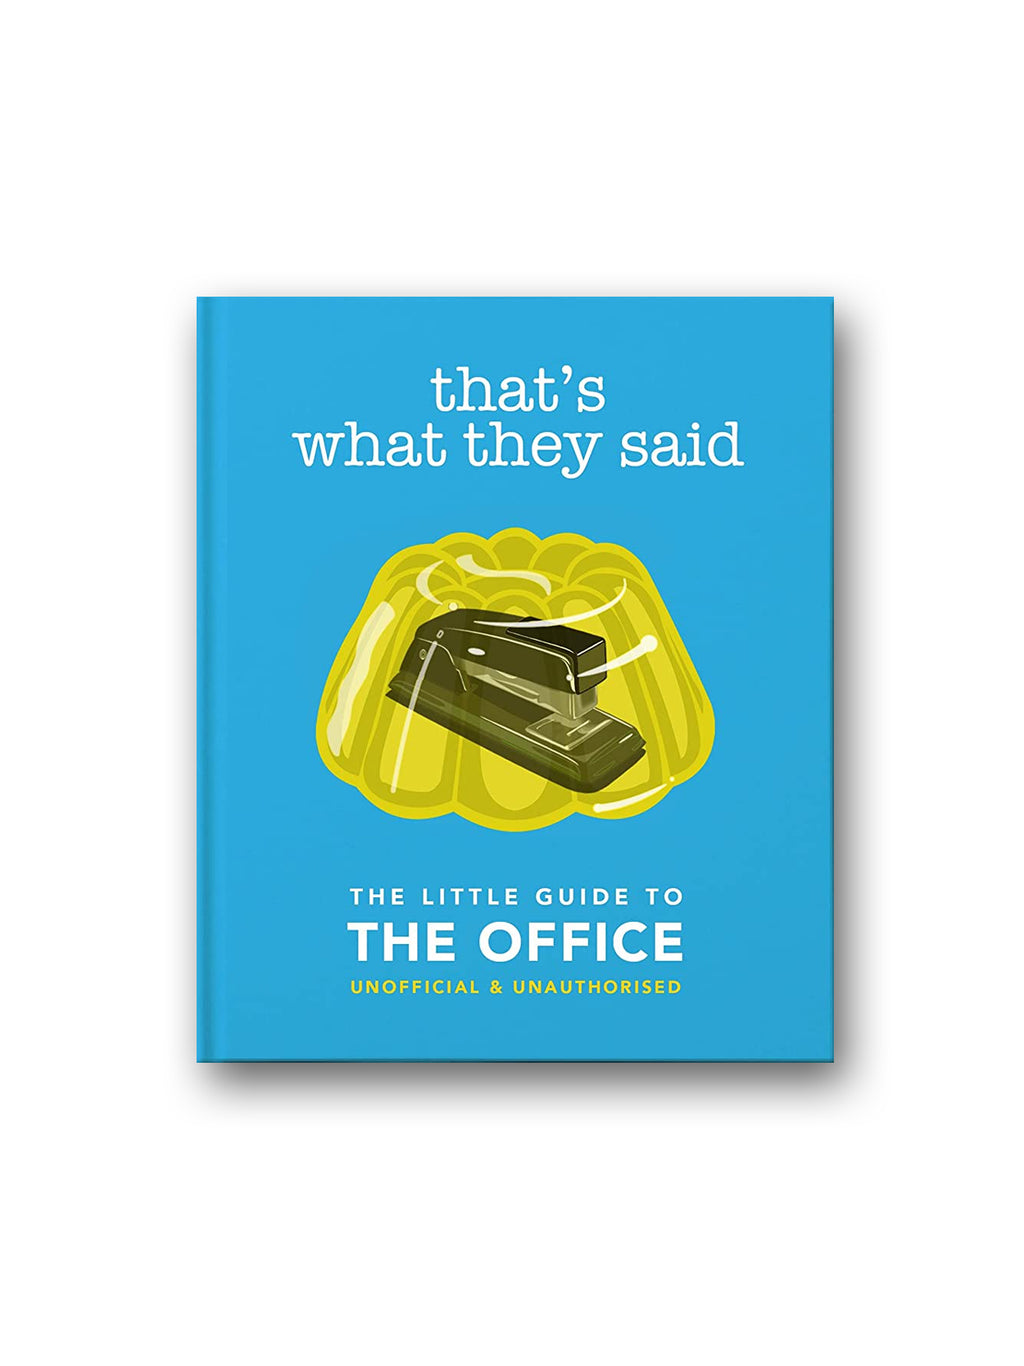 The Little Guide to The Office